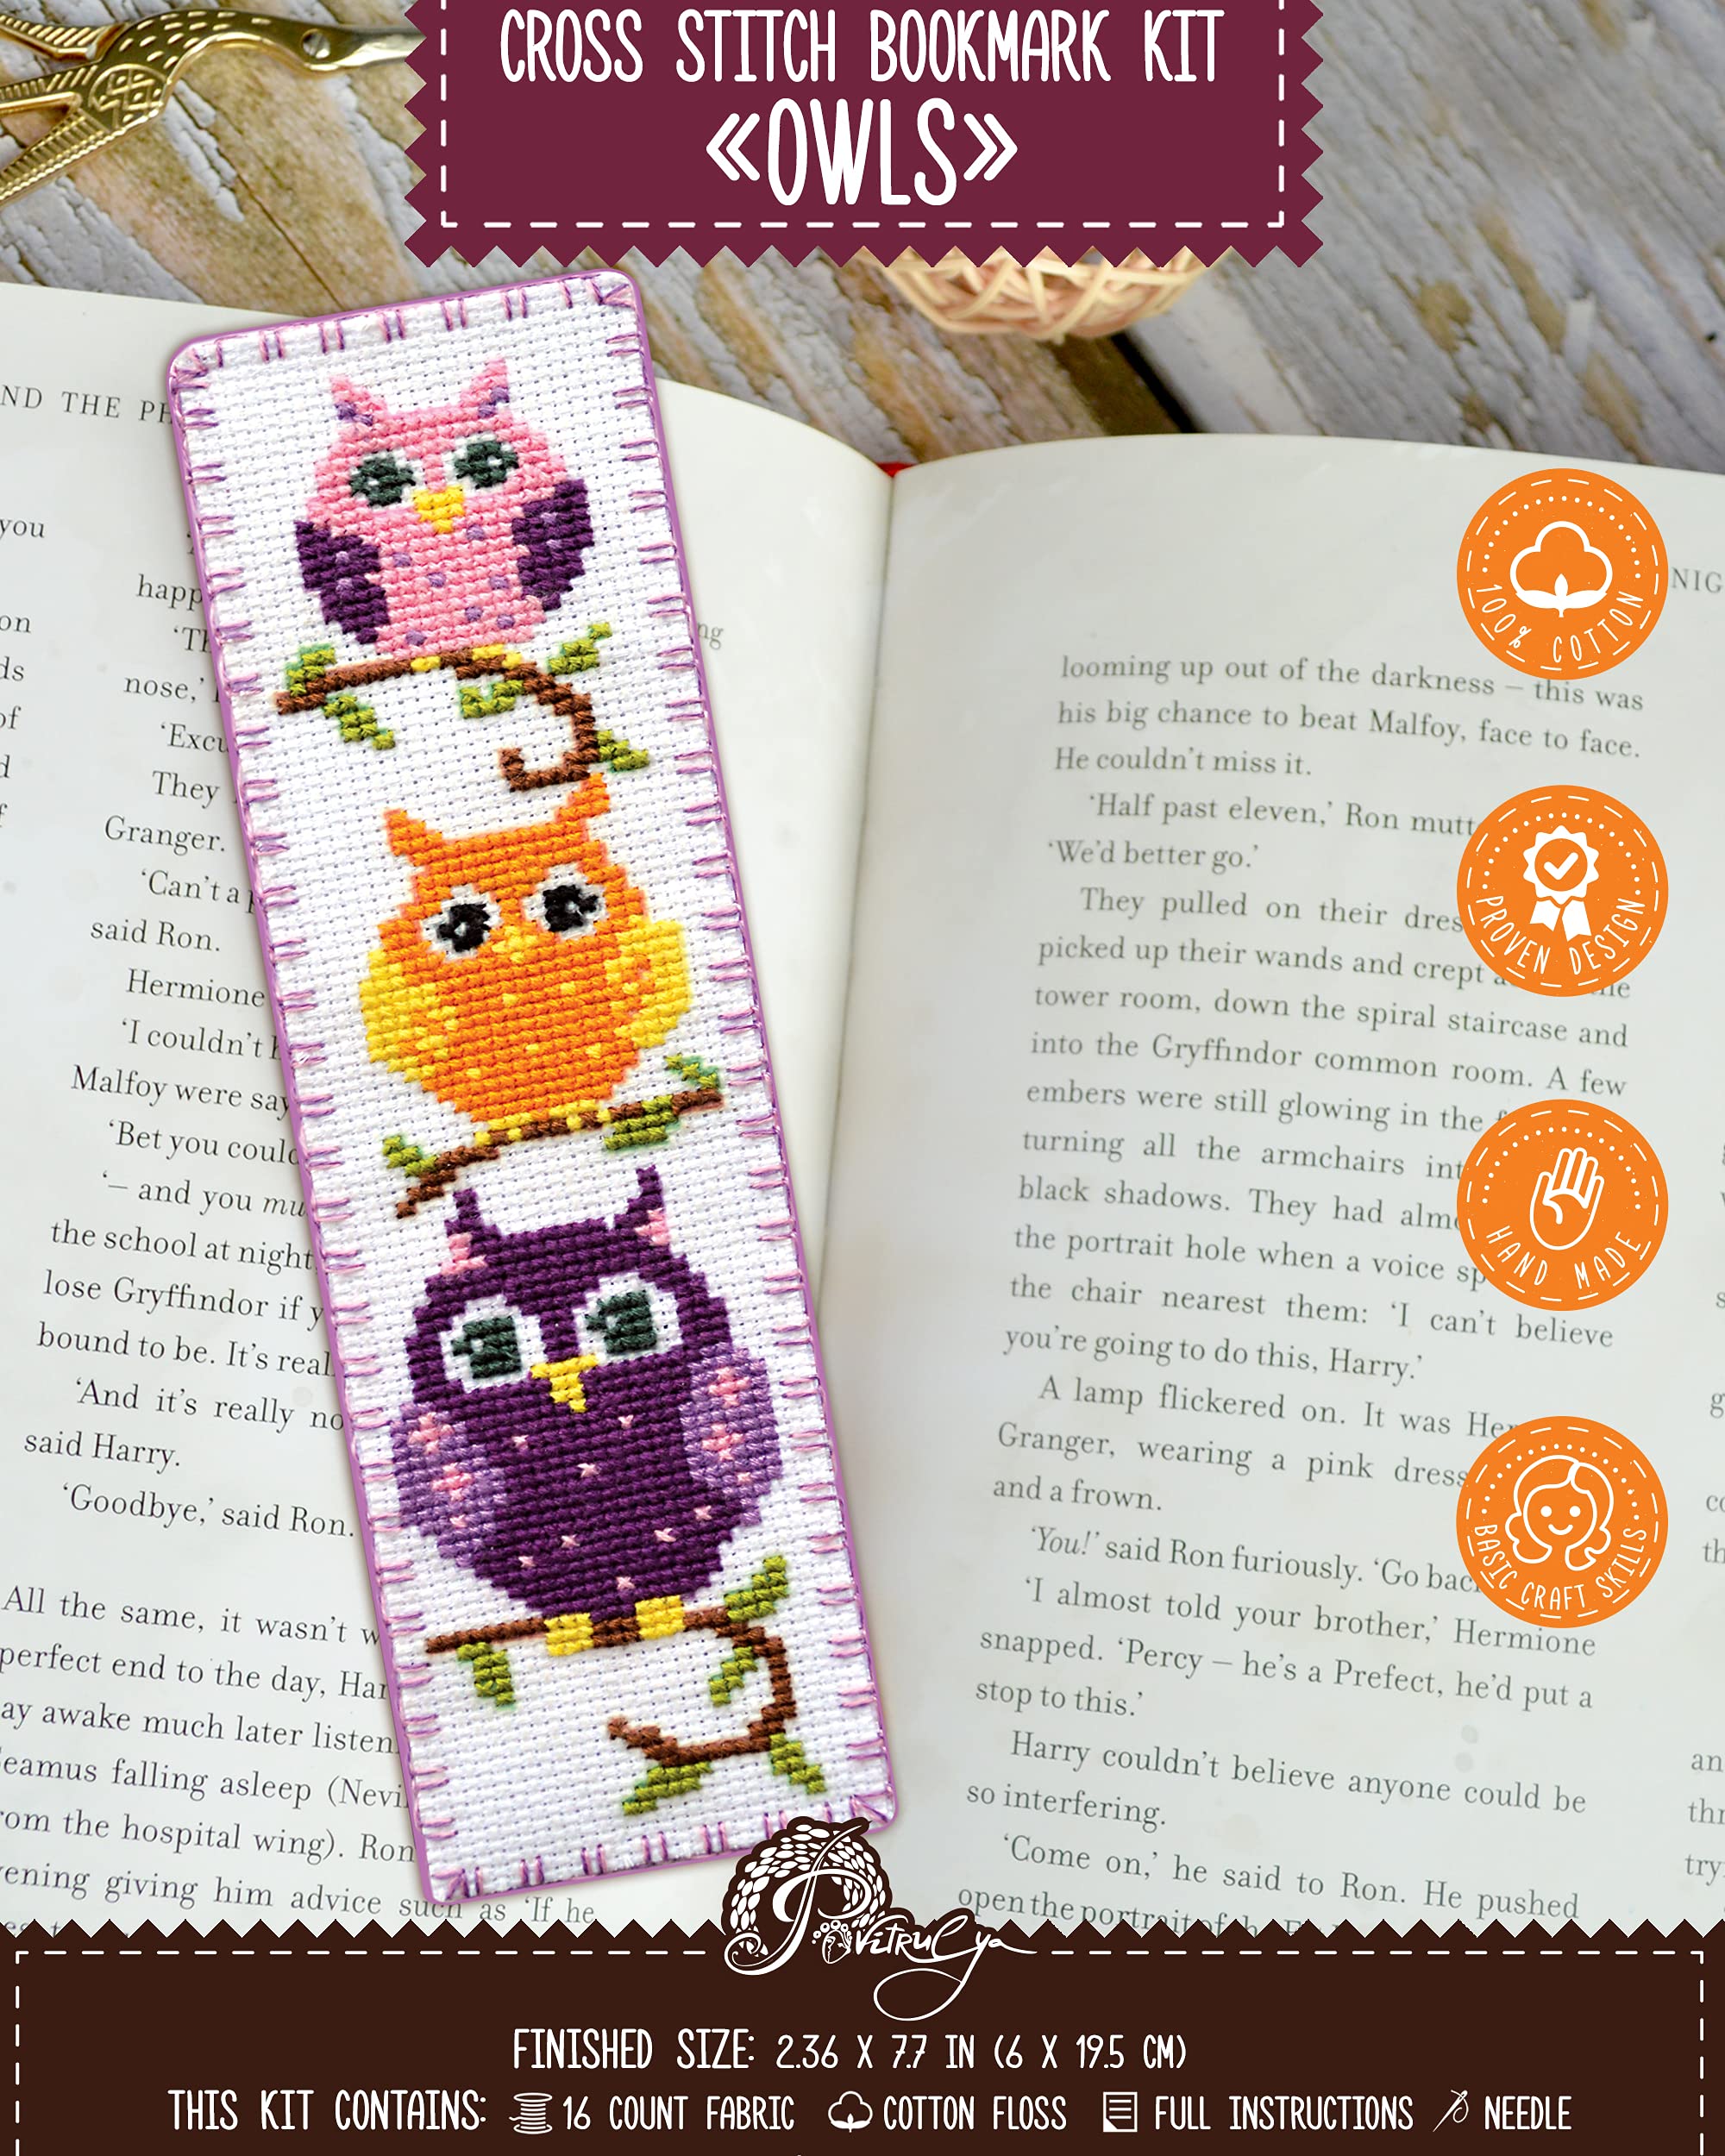 Povitrulya Counted Cross Stitch Kit - DIY Kits for Adults or Kids - Funny  Embroidery Bookmark - Easy to Use - Craft Collection - Owls